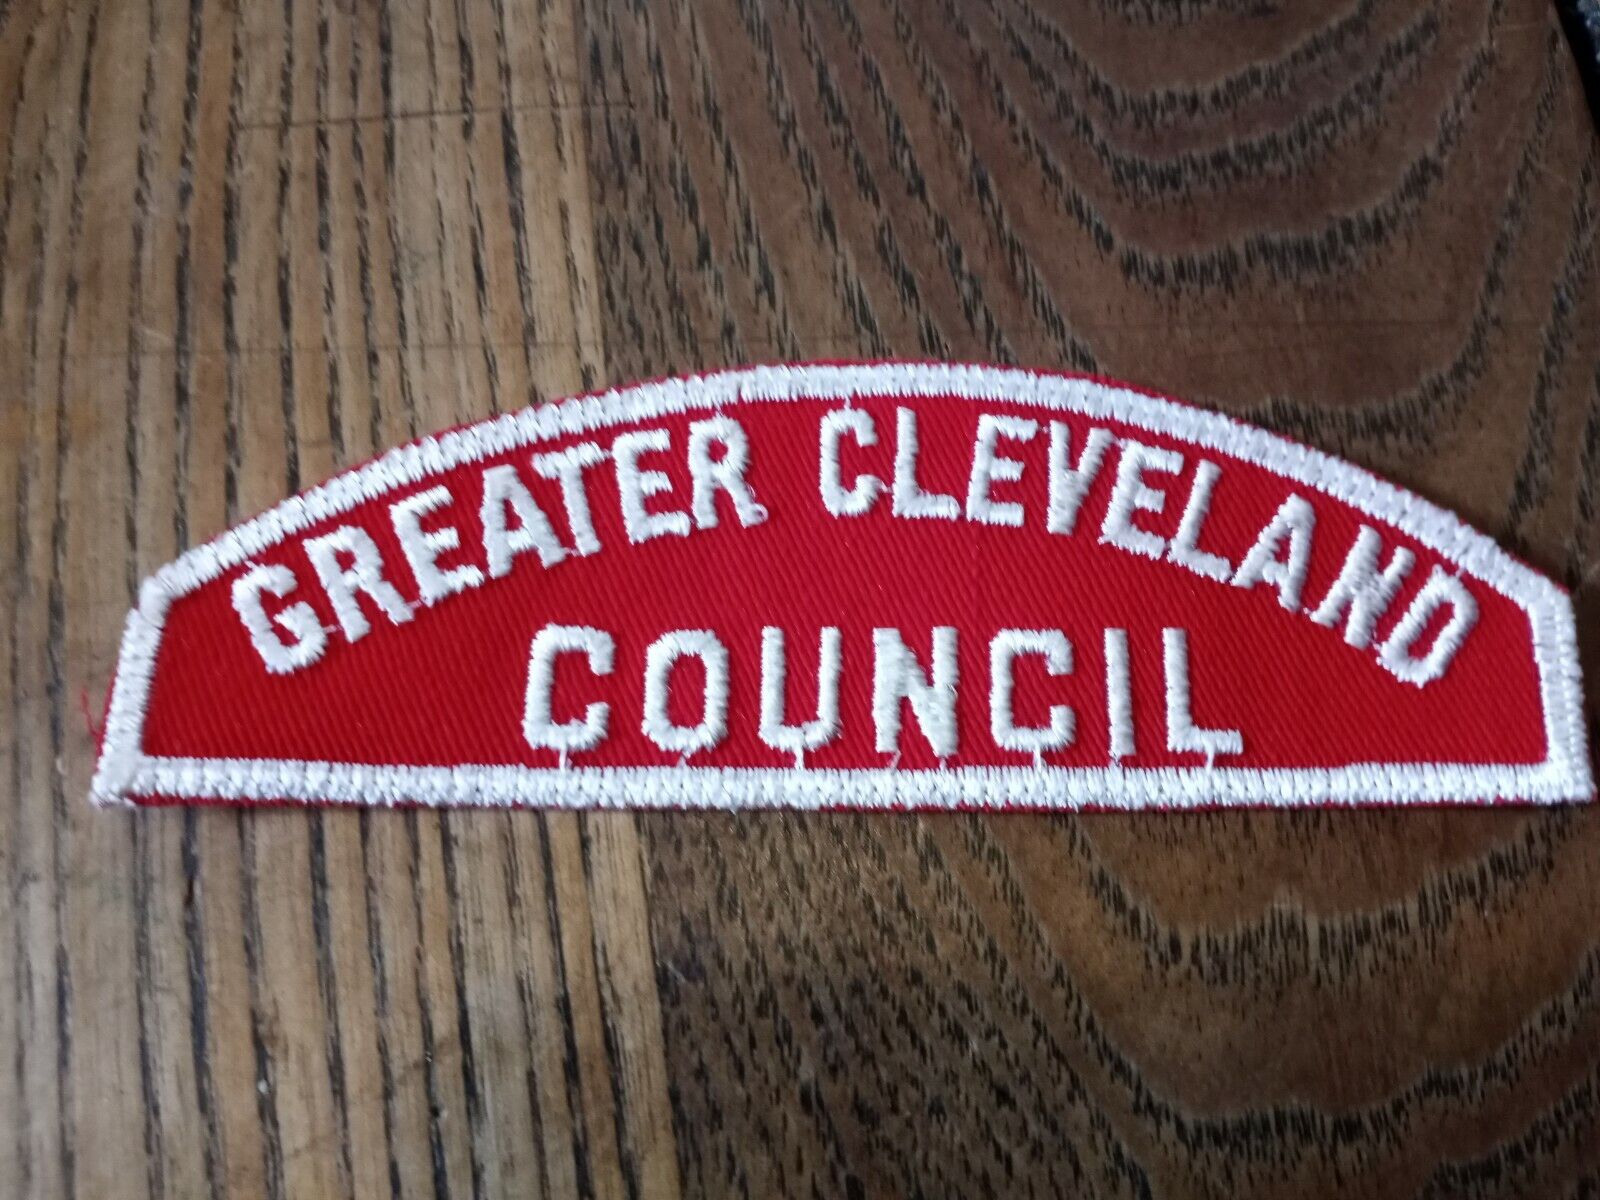 BOY SCOUT RWS GREATER CLEVELAND / COUNCIL RED & WHITE FULL STRIP